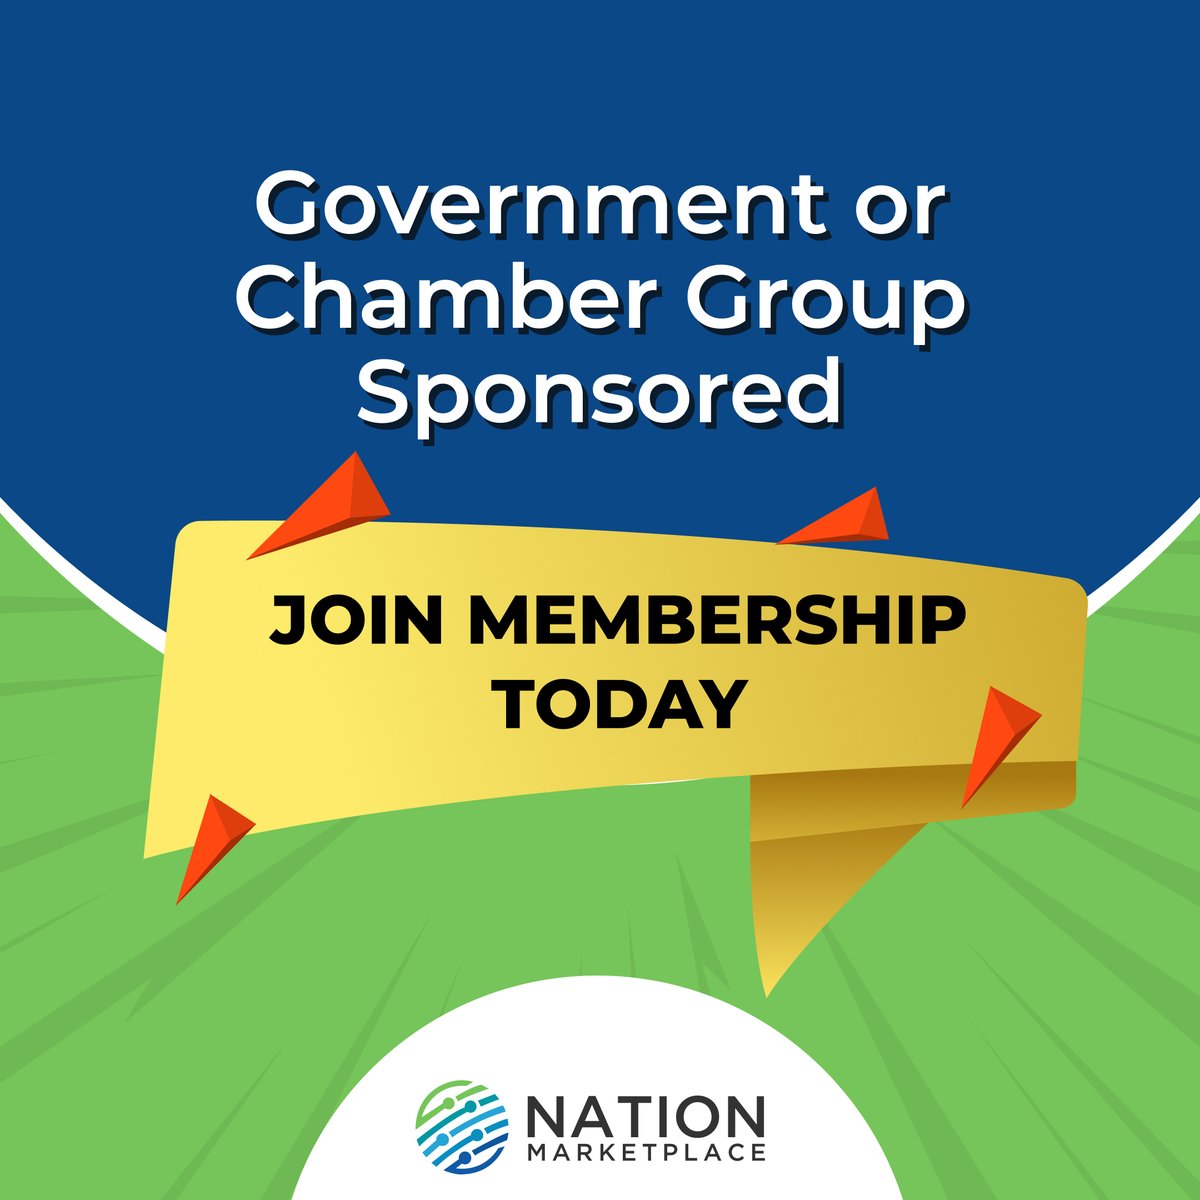 Government or Chamber Groups - Reach out to us for a special membership
#government #chamberofcomerce #globalmarketplace #usamarketplace #b2bbusiness #marketplace #nationmarketplace #b2bsource #sourcing #highqualityproduct #manufacturer #globalsourcing #business #entrepreneur